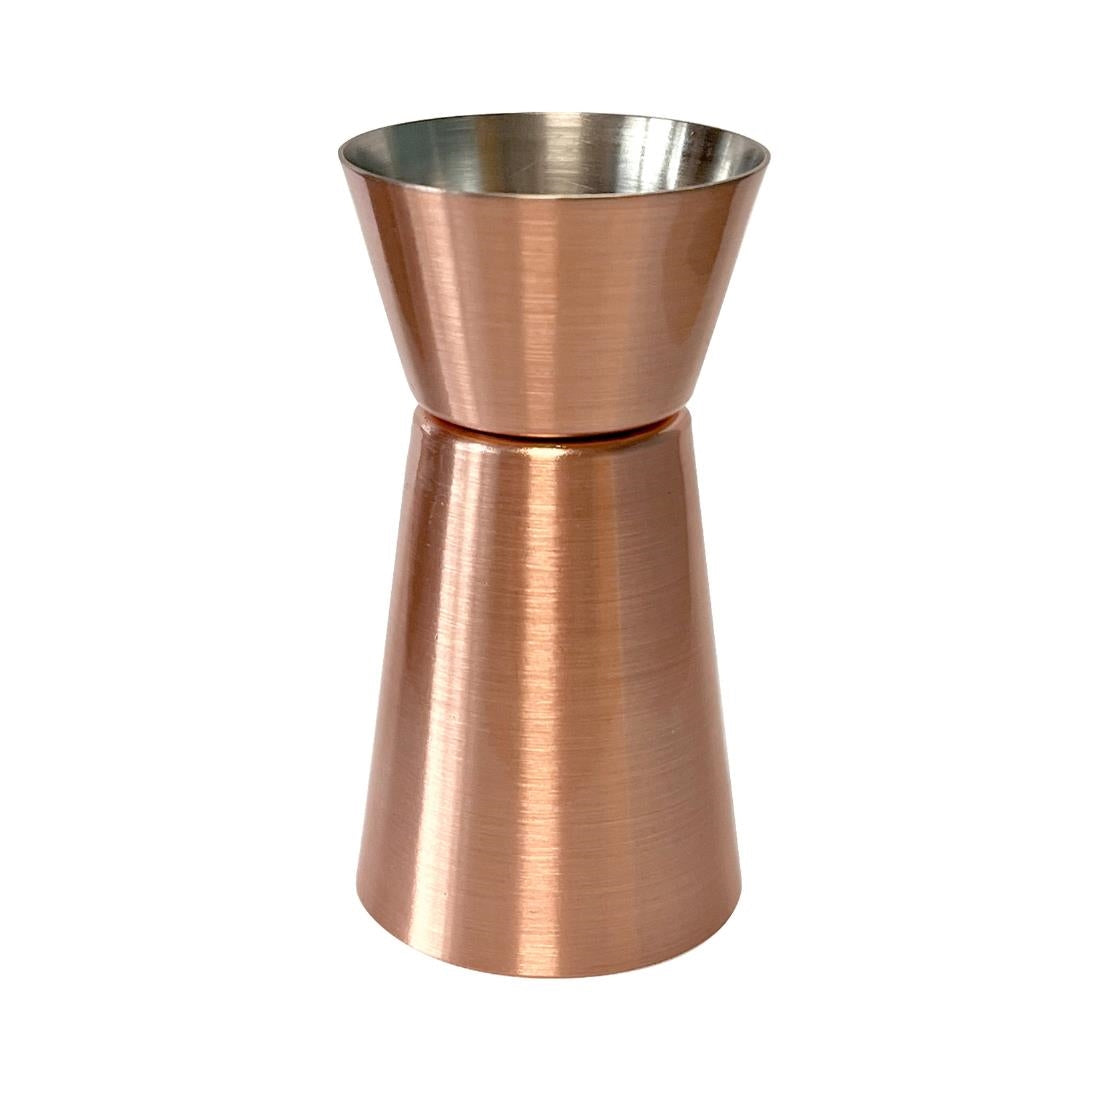 CZ351 Beaumont Professional Stainless Steel Jigger Copper Plated 25/50ml JD Catering Equipment Solutions Ltd